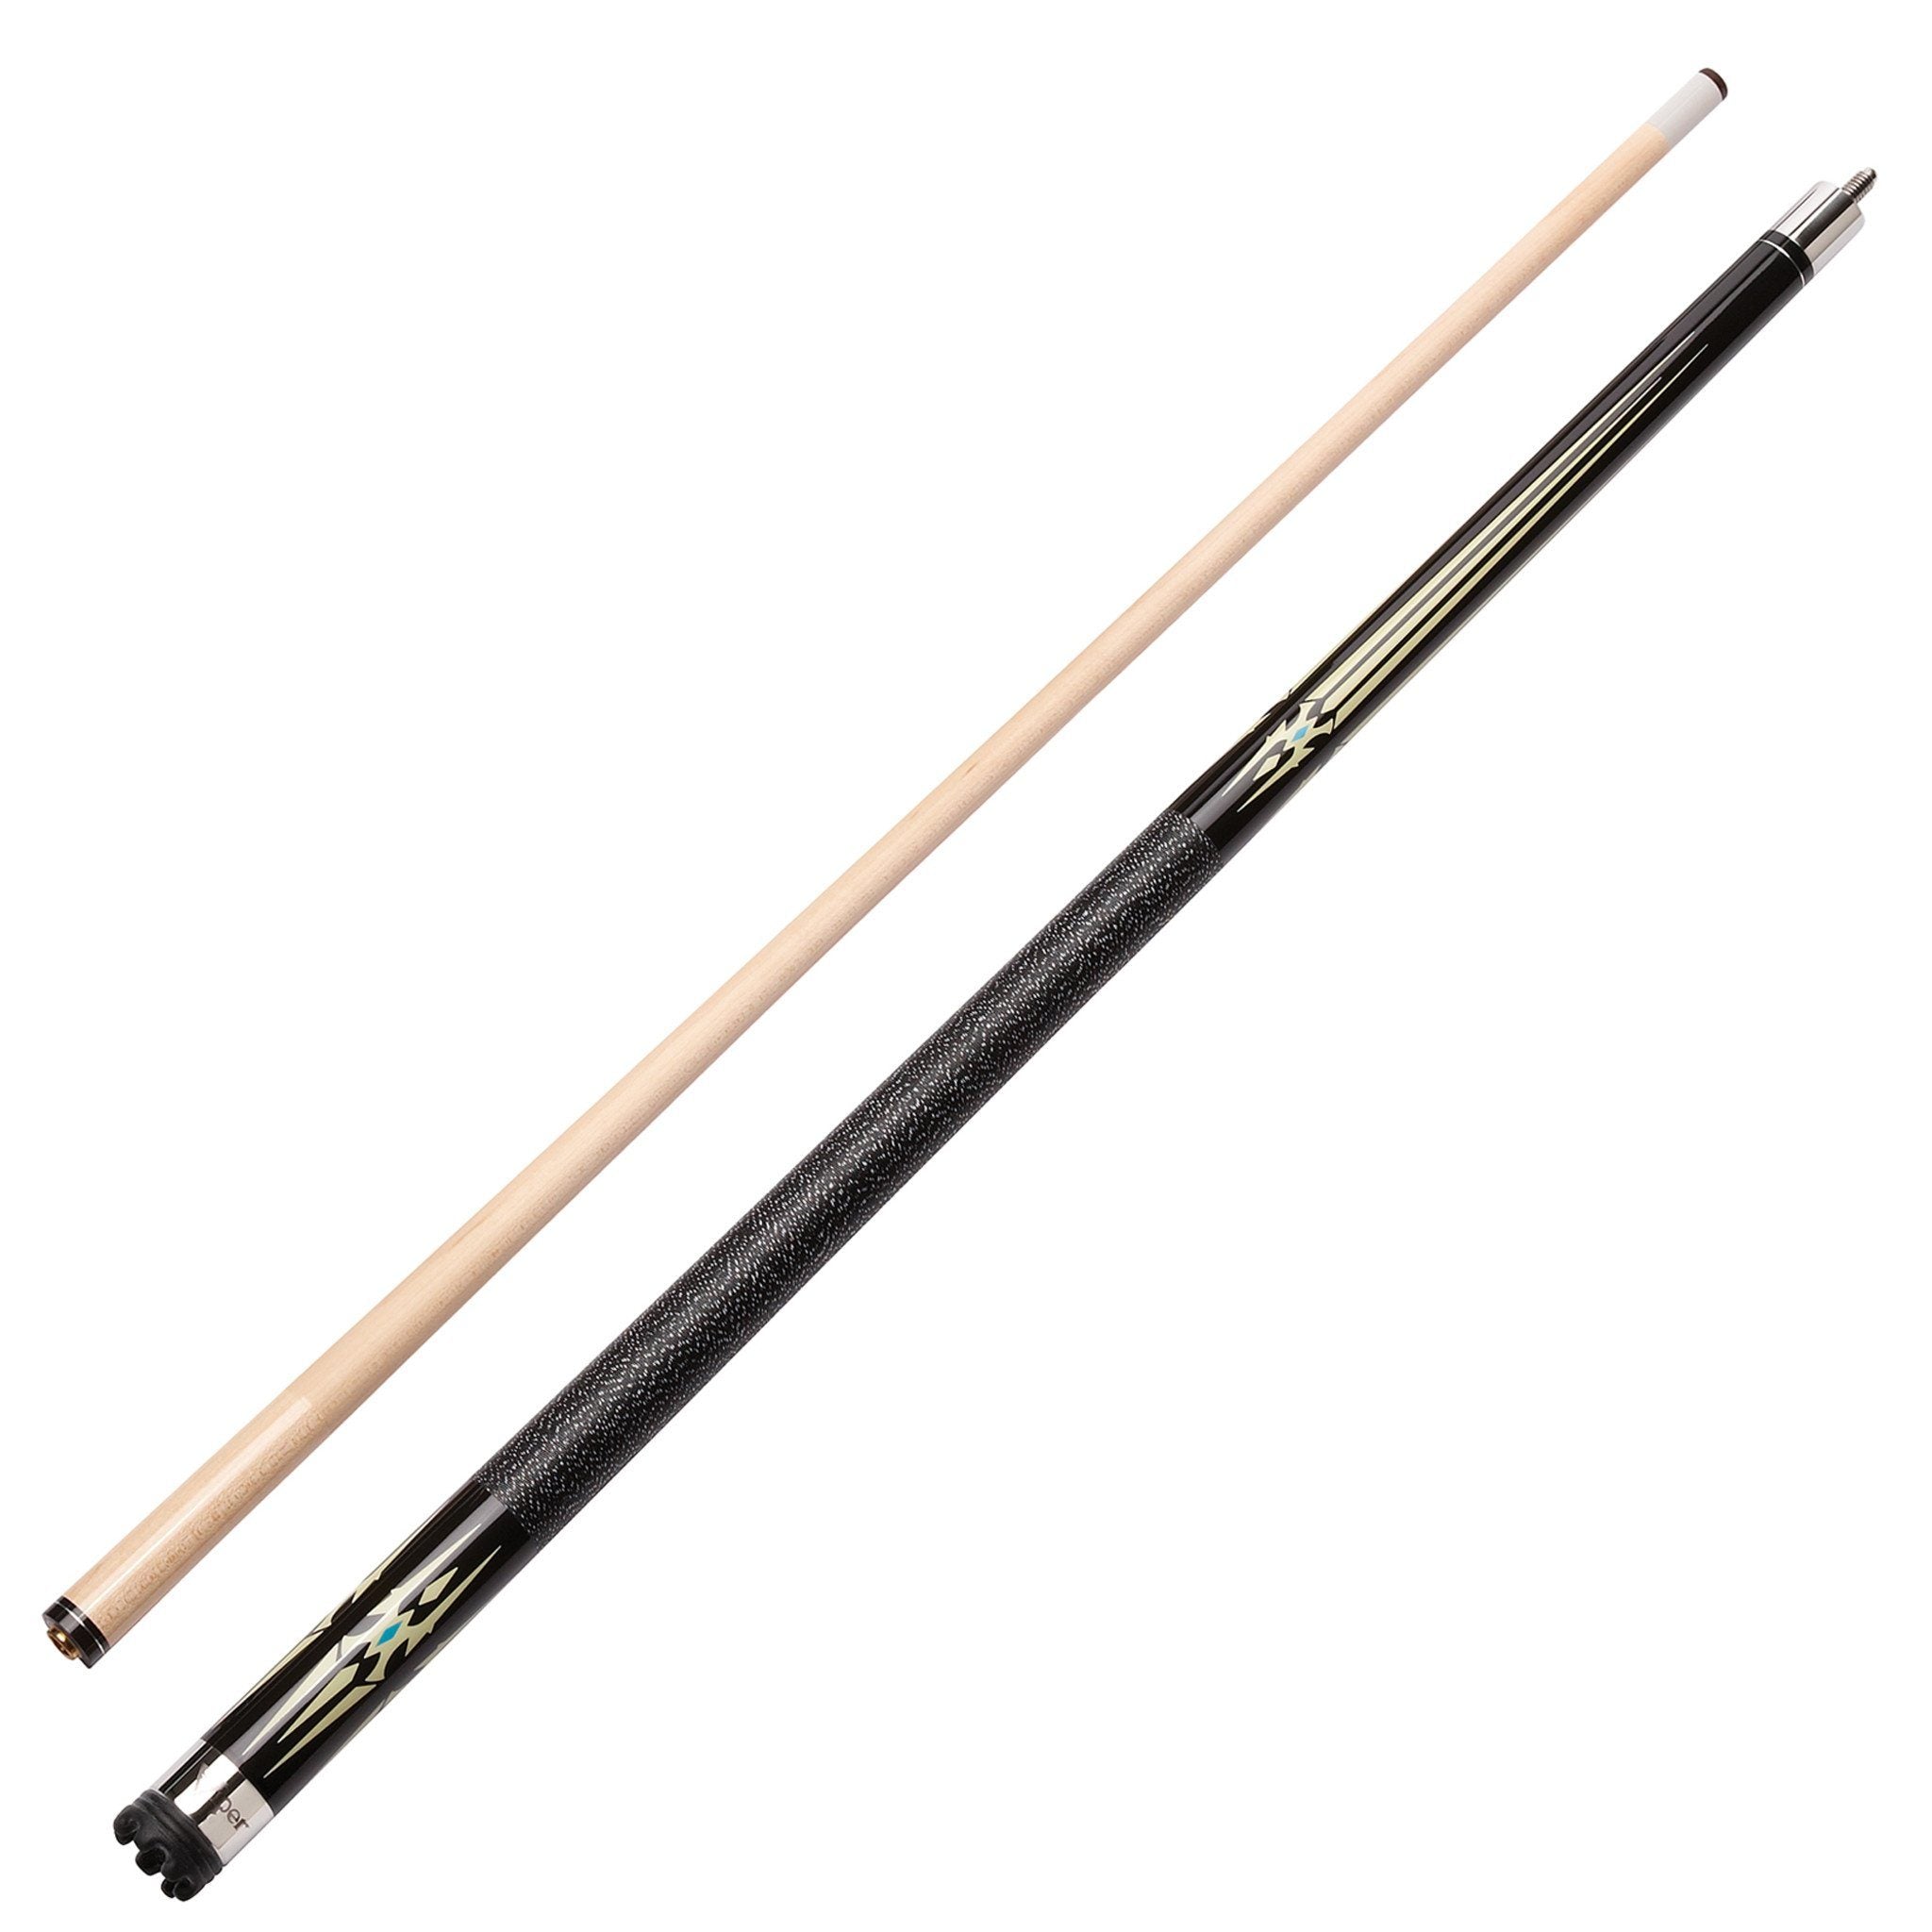 Viper Sinister Series Cue with Black and White Design and Casemaster Q-Vault Supreme Black Cue Case